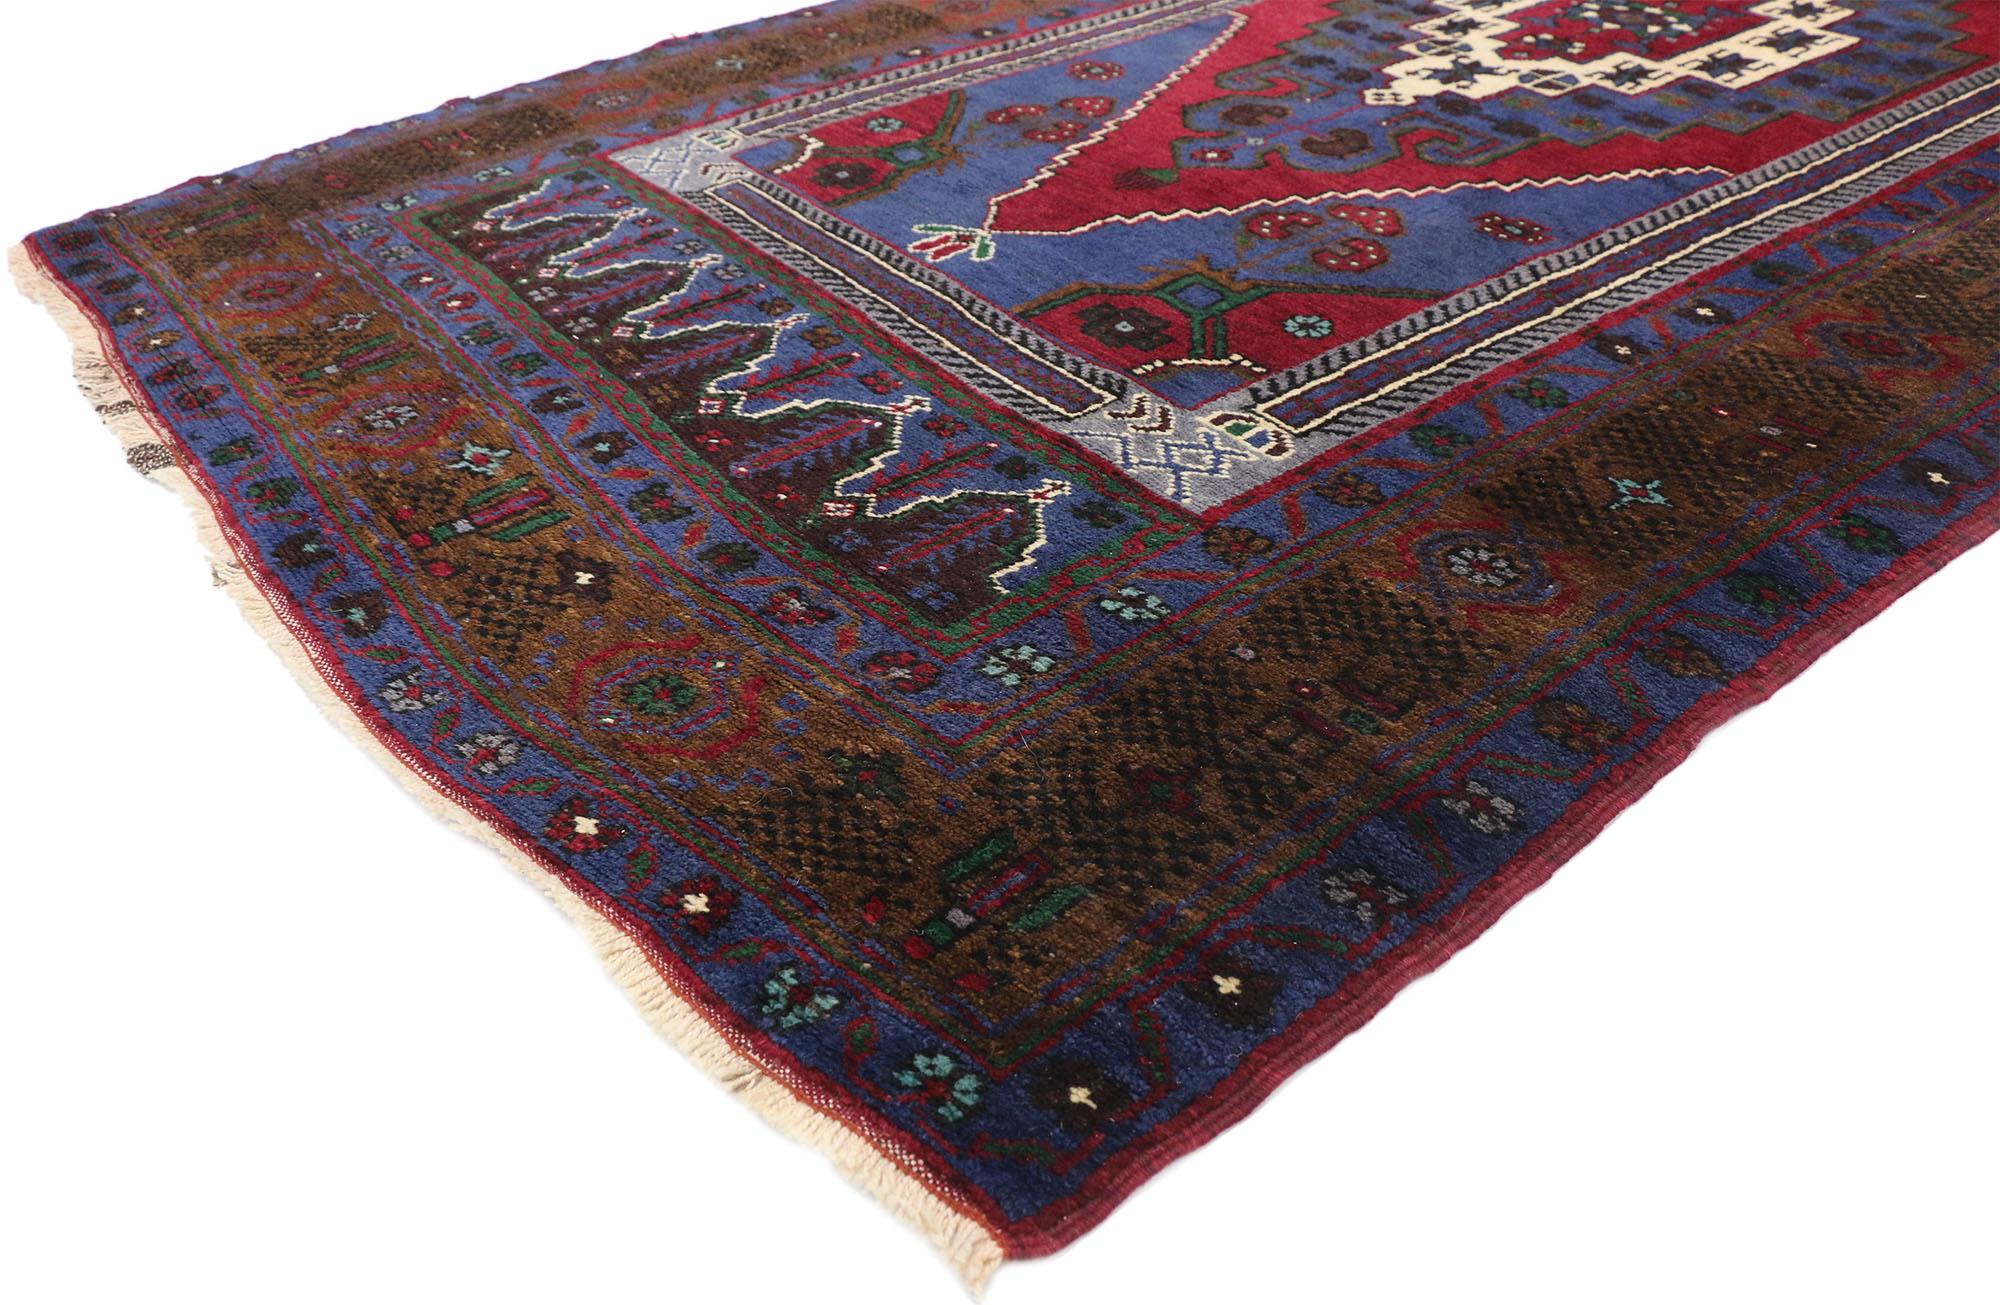 77226 Vintage Turkish Konya Taspinar rug with Venetian Renaissance style. With its rich detailing, vibrant colors, and symmetry, this hand-knotted wool vintage Turkish Konya Taspinar rug beautifully embodies Venetian Renaissance style. The